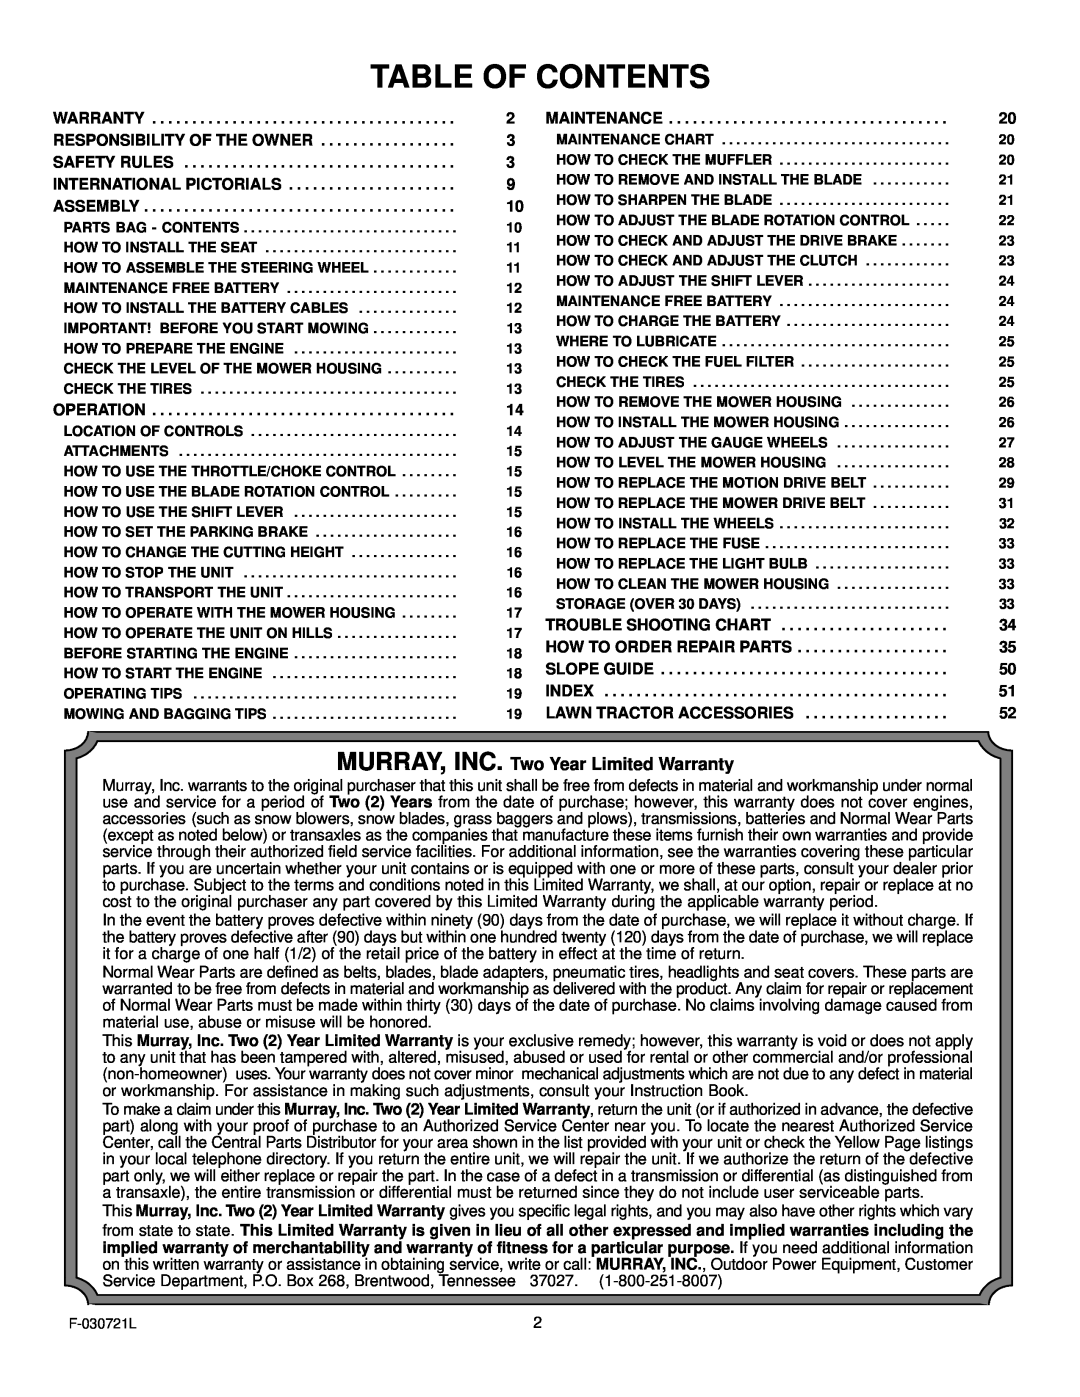 Murray 425007x92B manual Table Of Contents, MURRAY, INC. Two Year Limited Warranty 